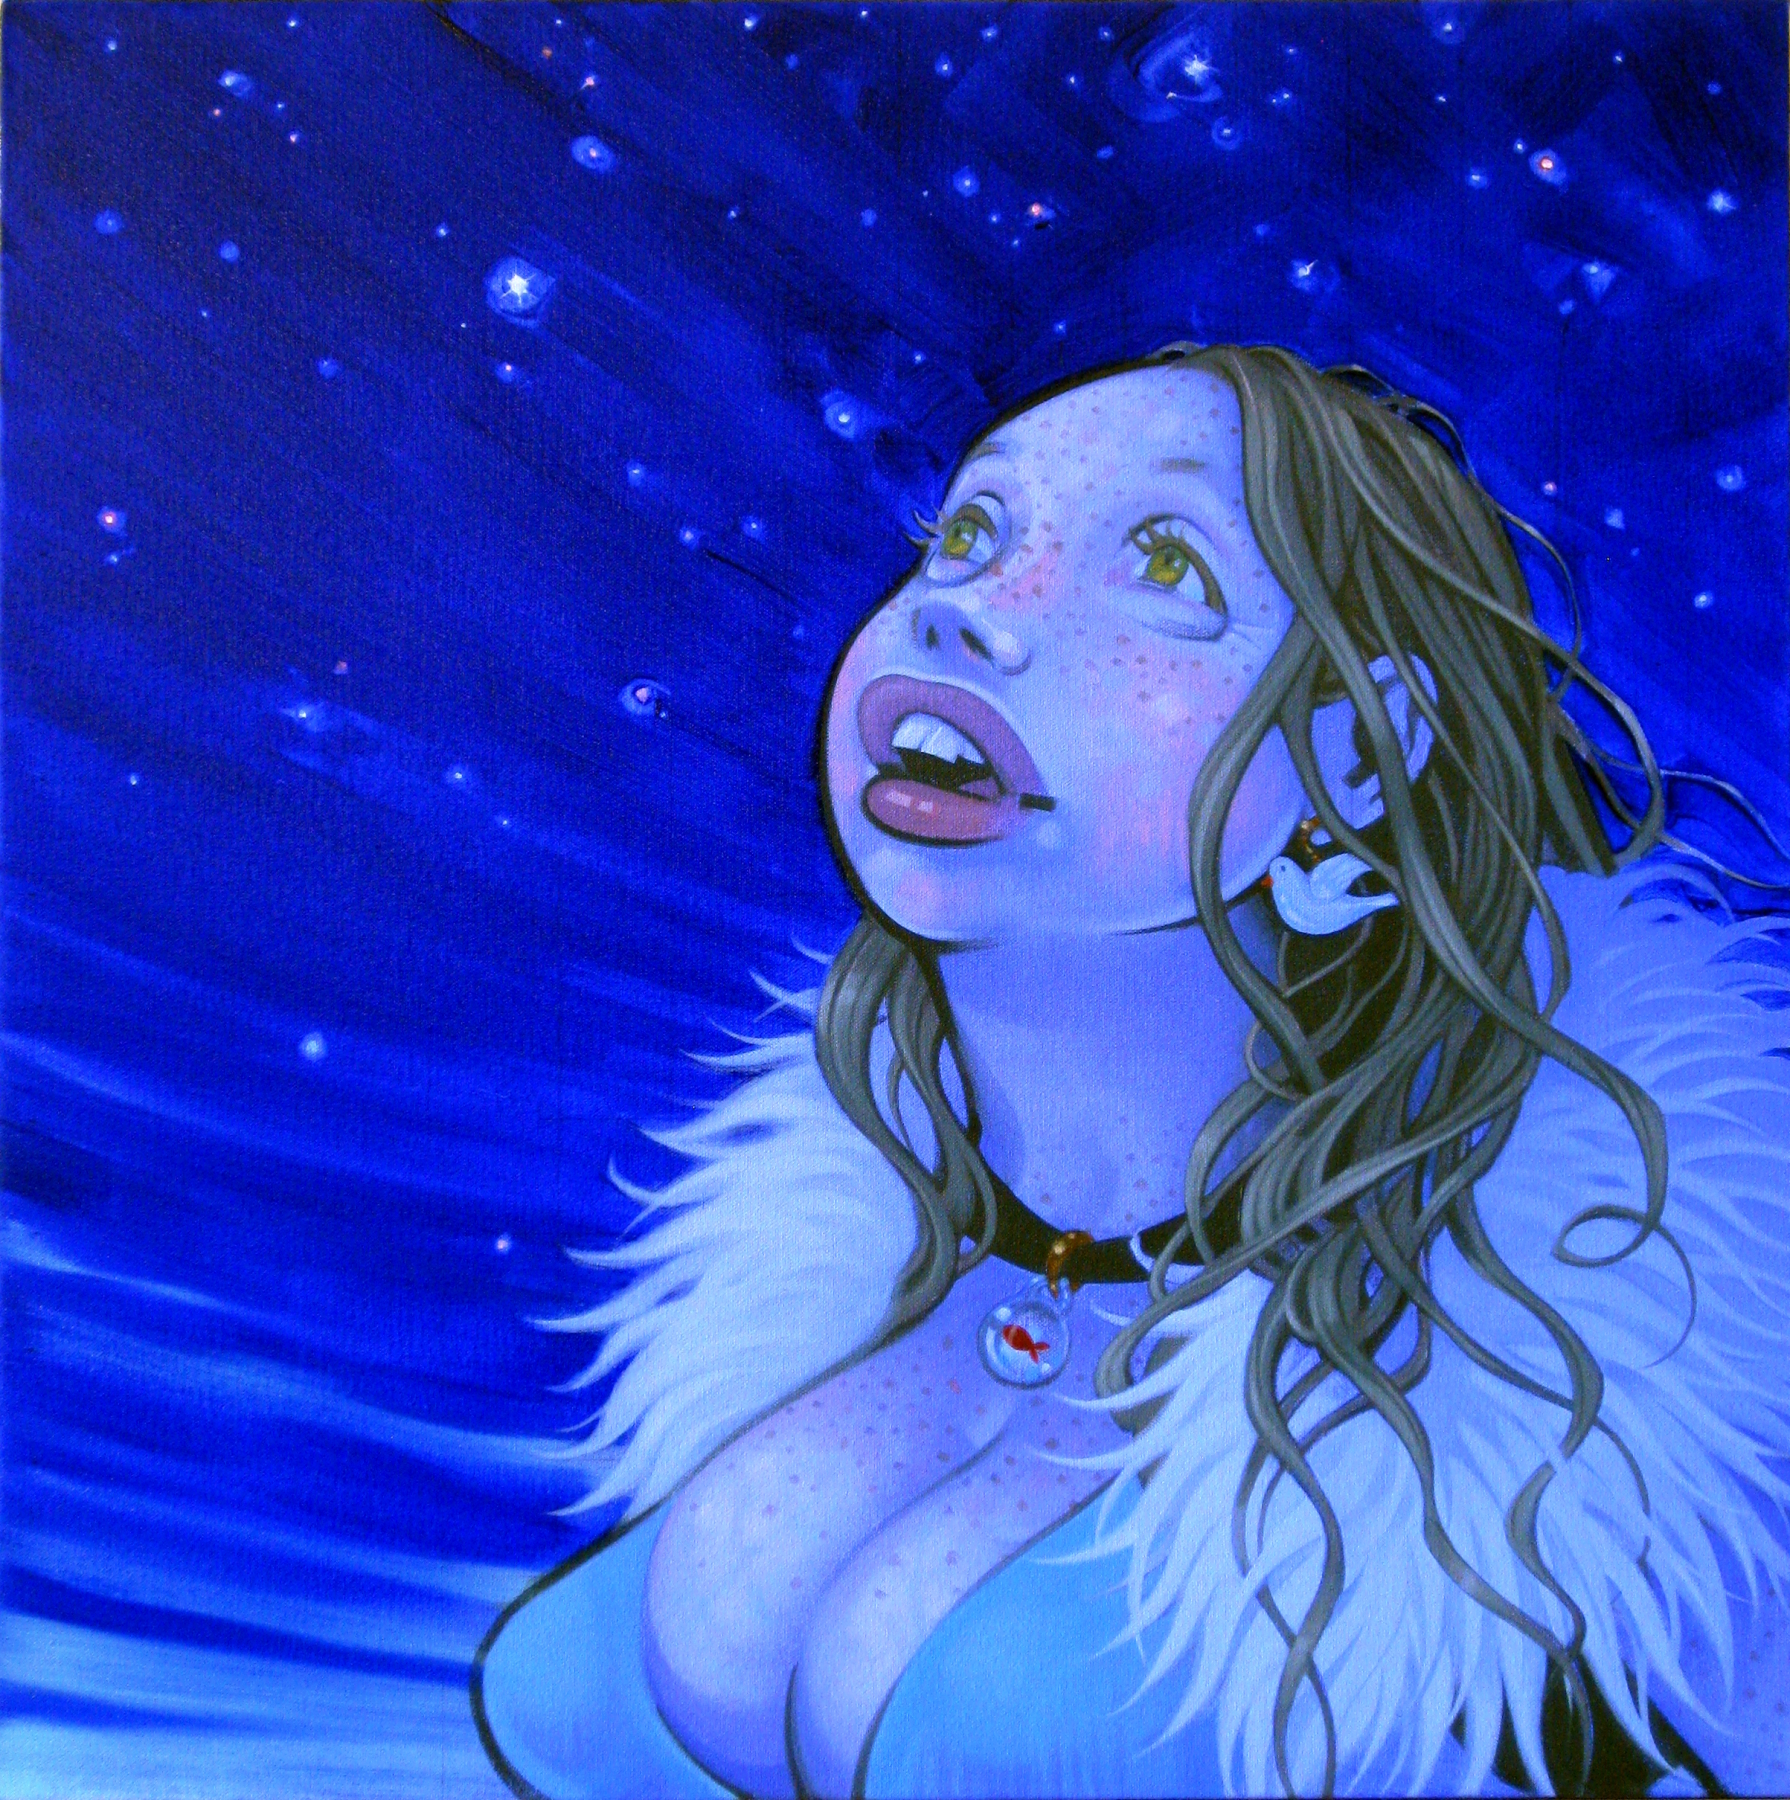 Twinkle, 2009, courtesy of Greg Jacob, oil on canvas, 24 x 24 inches, by Taiyo la Paix